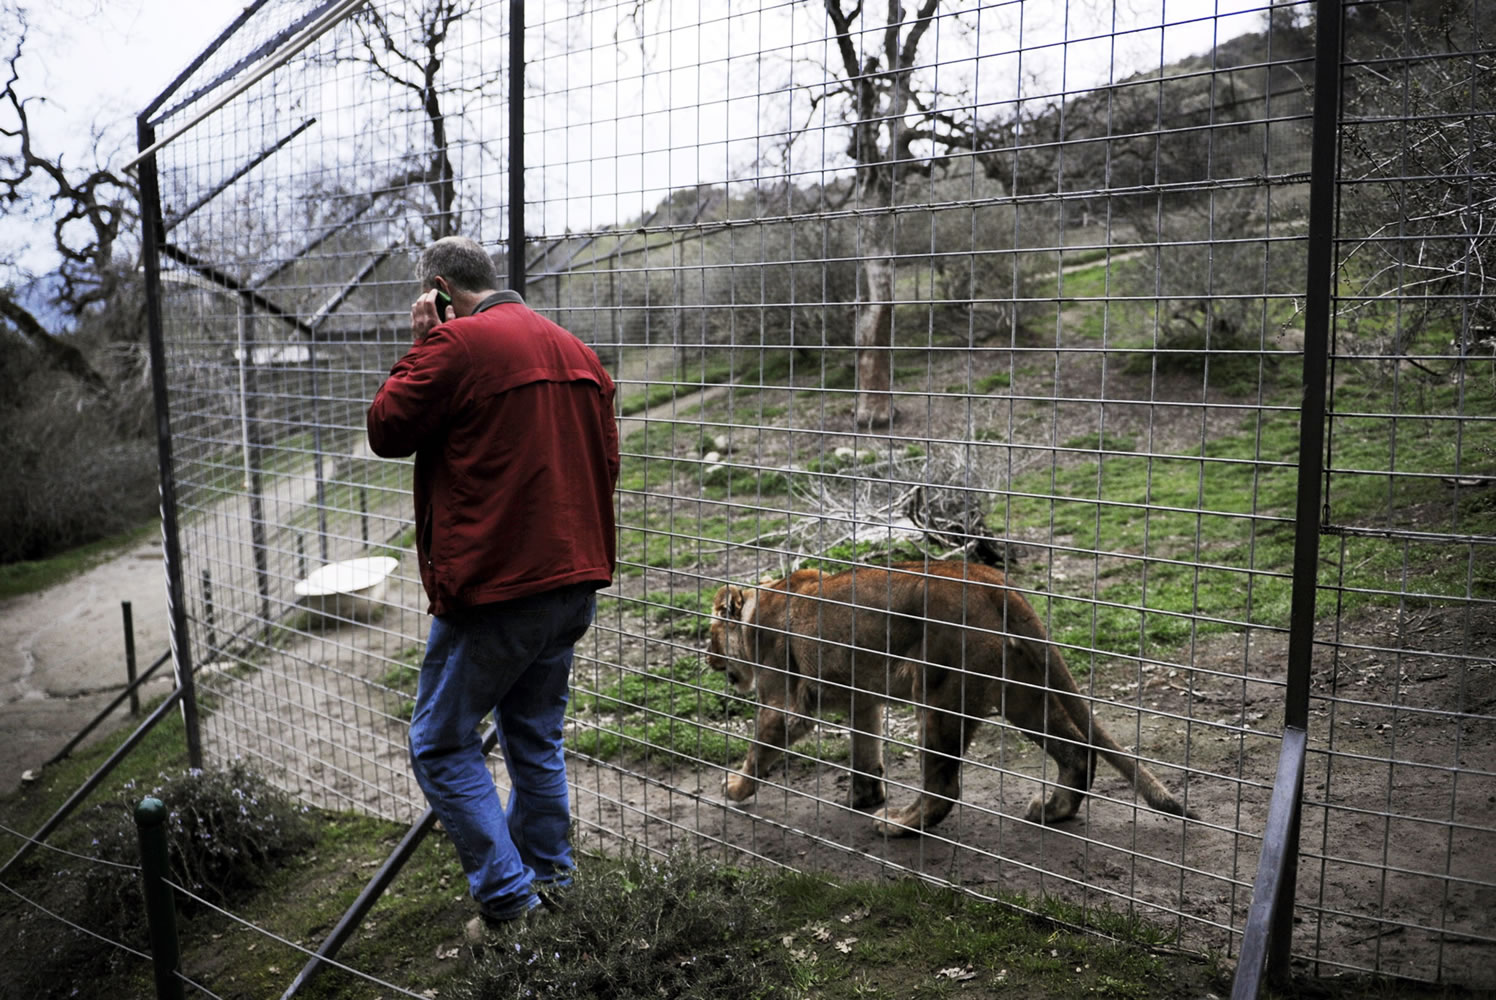 Dale Anderson, founder of Project Survival Cat Haven near Dunlap, Calif, walks quietly with Pele, a female lion, at the same fenced habitat area where a day earlier Cat Haven sanctuary worker Dianna Hanson, 24, died from an attack.